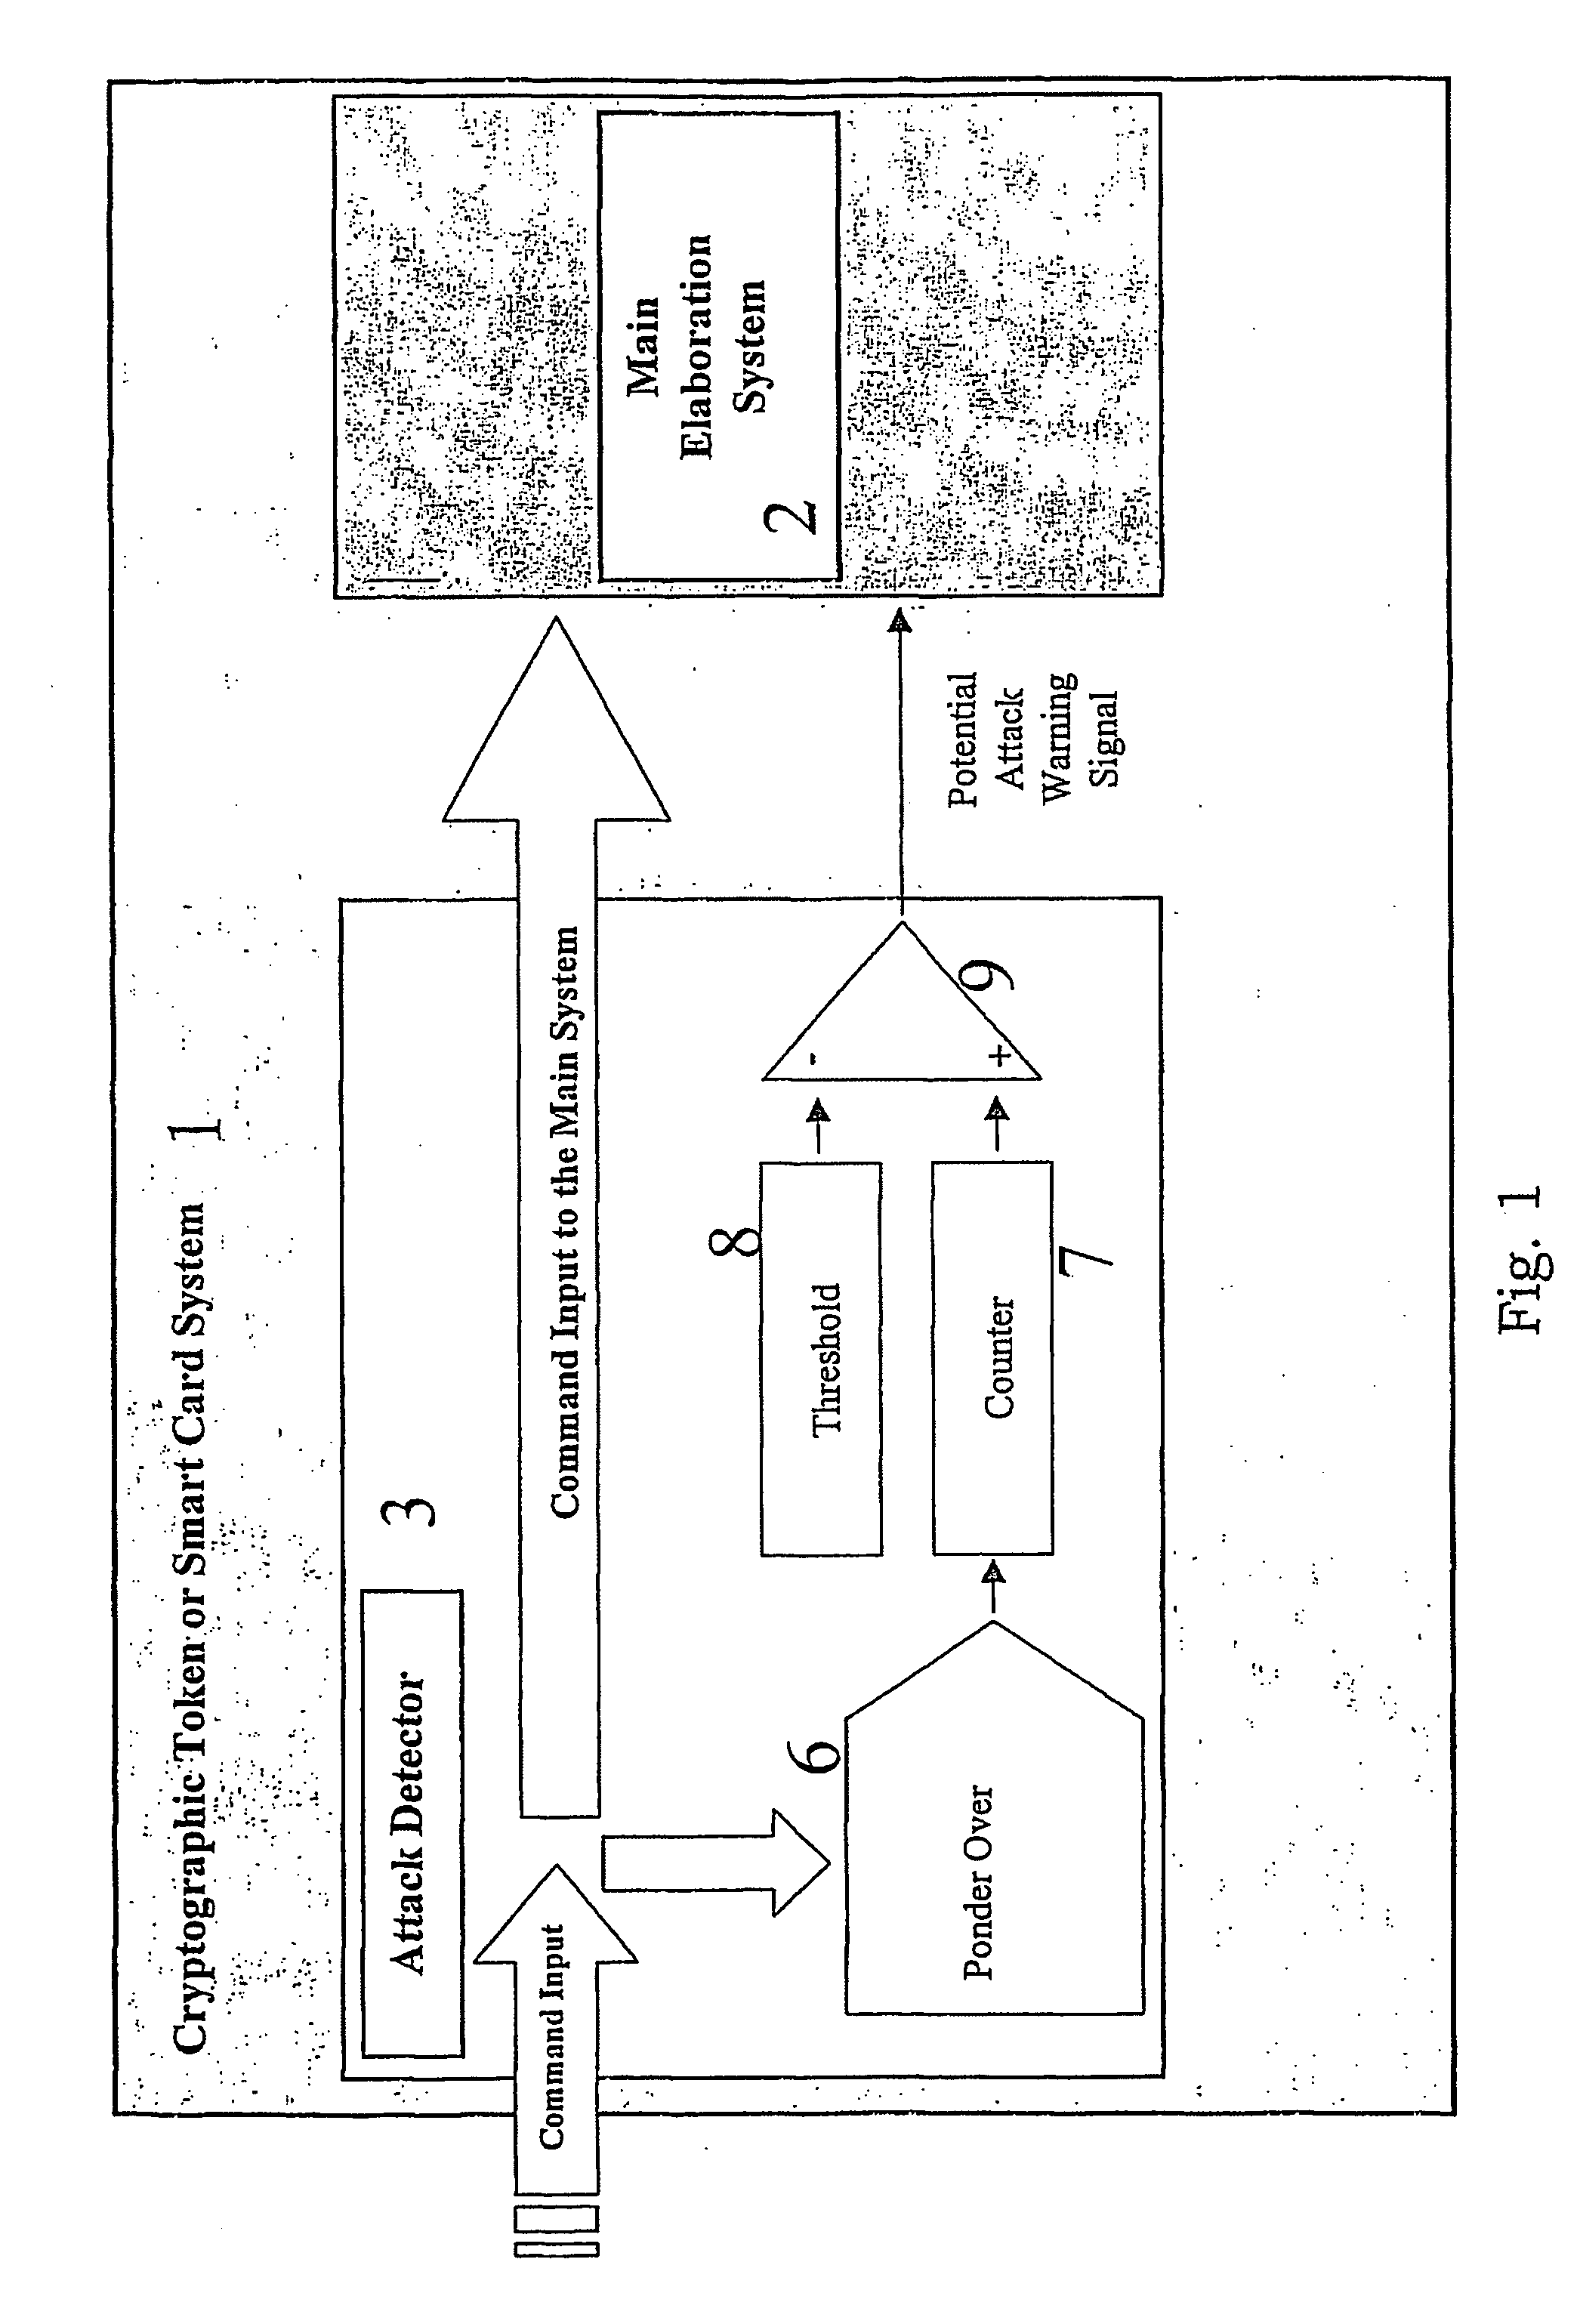 Method For Detecting and Reacting Against Possible Attack to Security Enforcing Operation Performed by a Cryptographic Token or Card